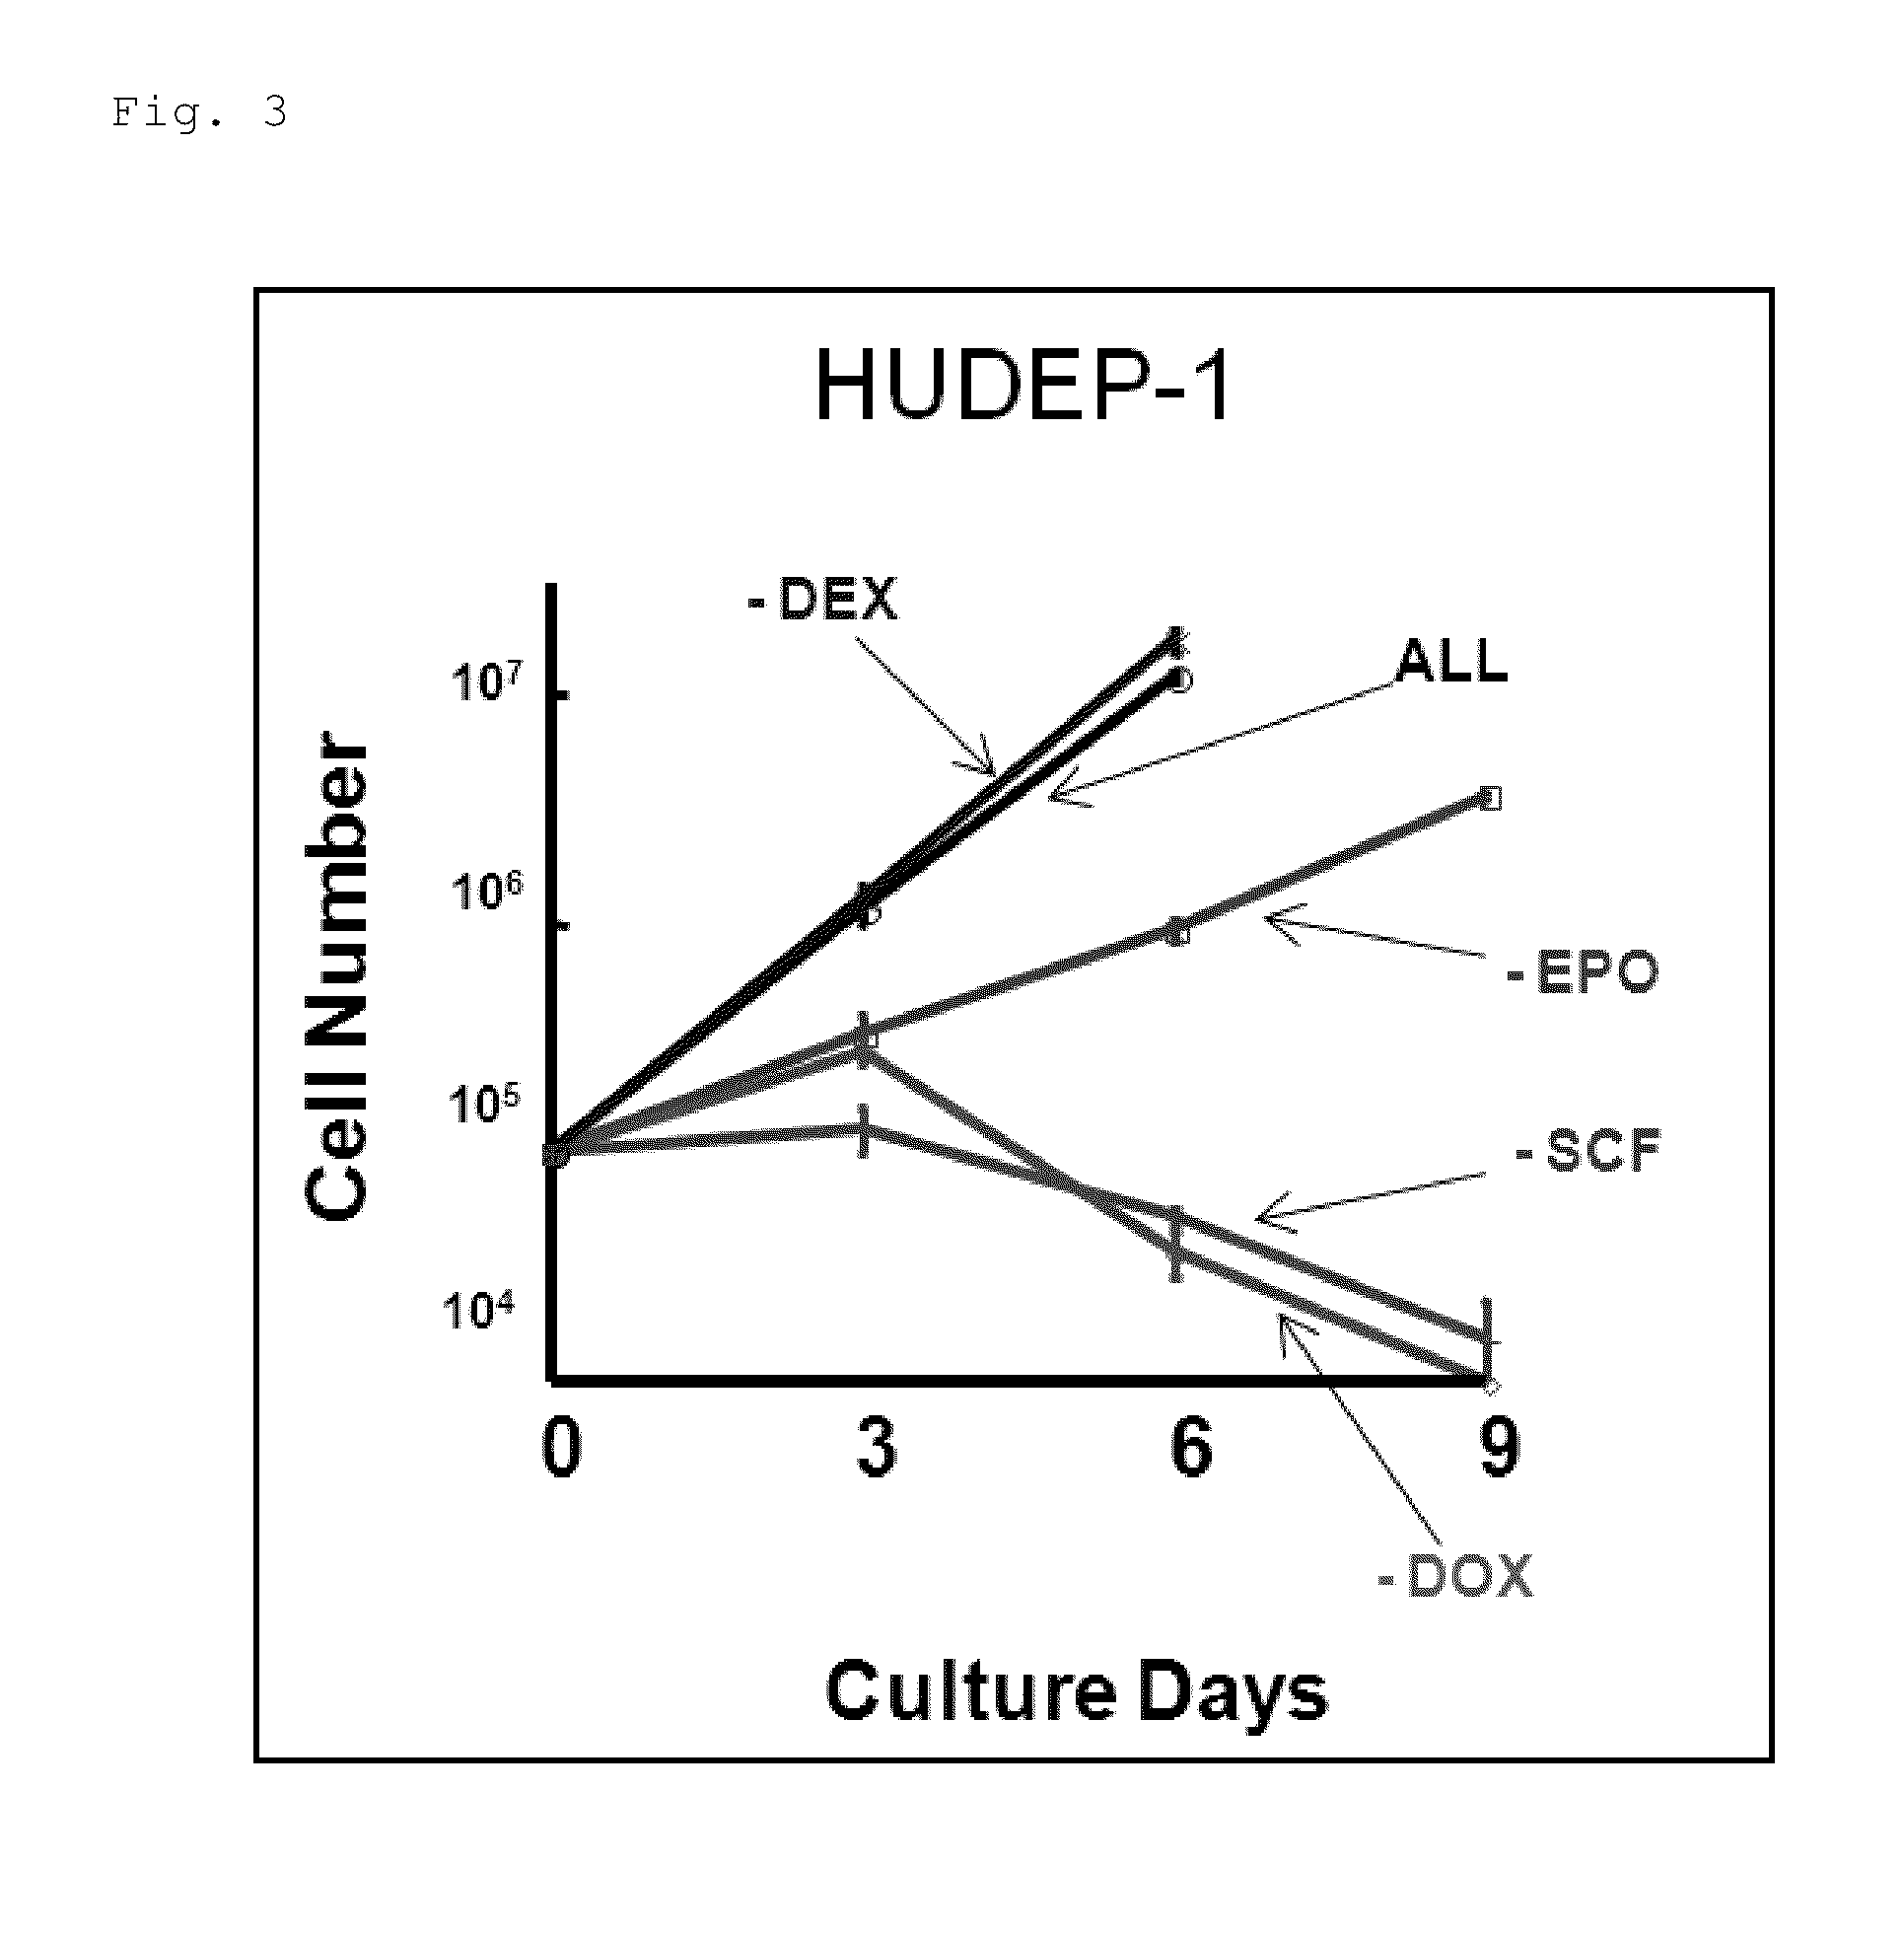 Human erythroid progenitor cell line and method for producing human enucleated red blood cells